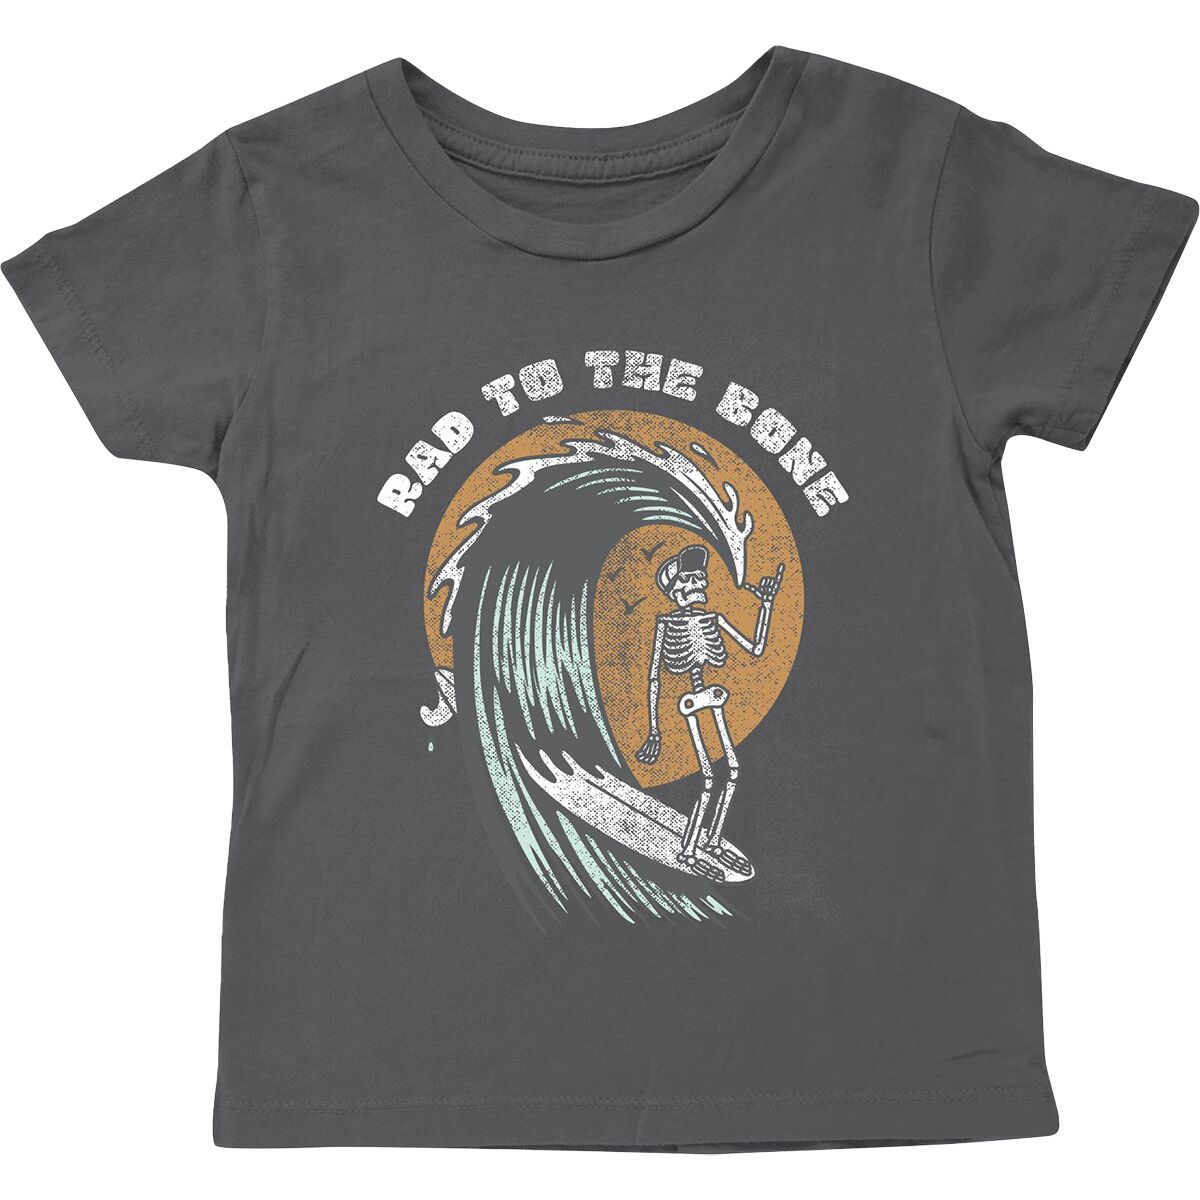 Tiny Whales Rad To The Bone T-Shirt - Toddlers'